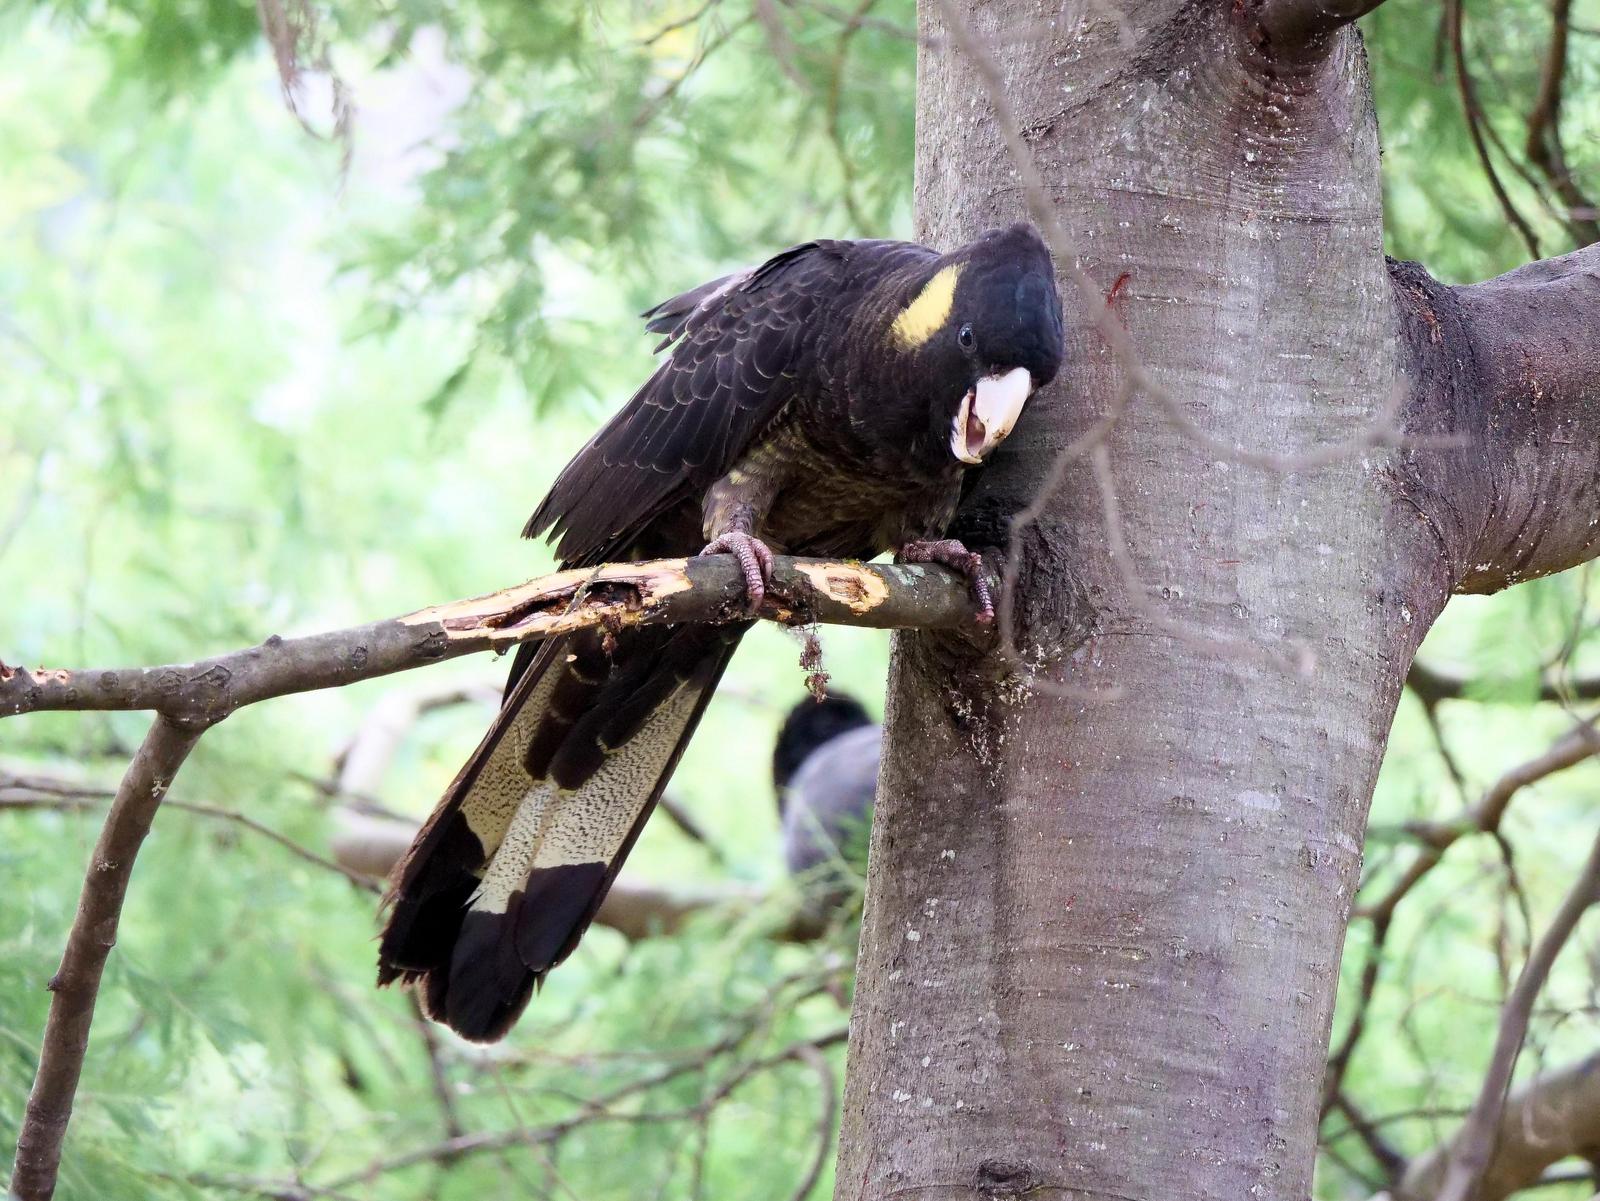 Yellow-tailed Black-Cockatoo Photo by Peter Lowe